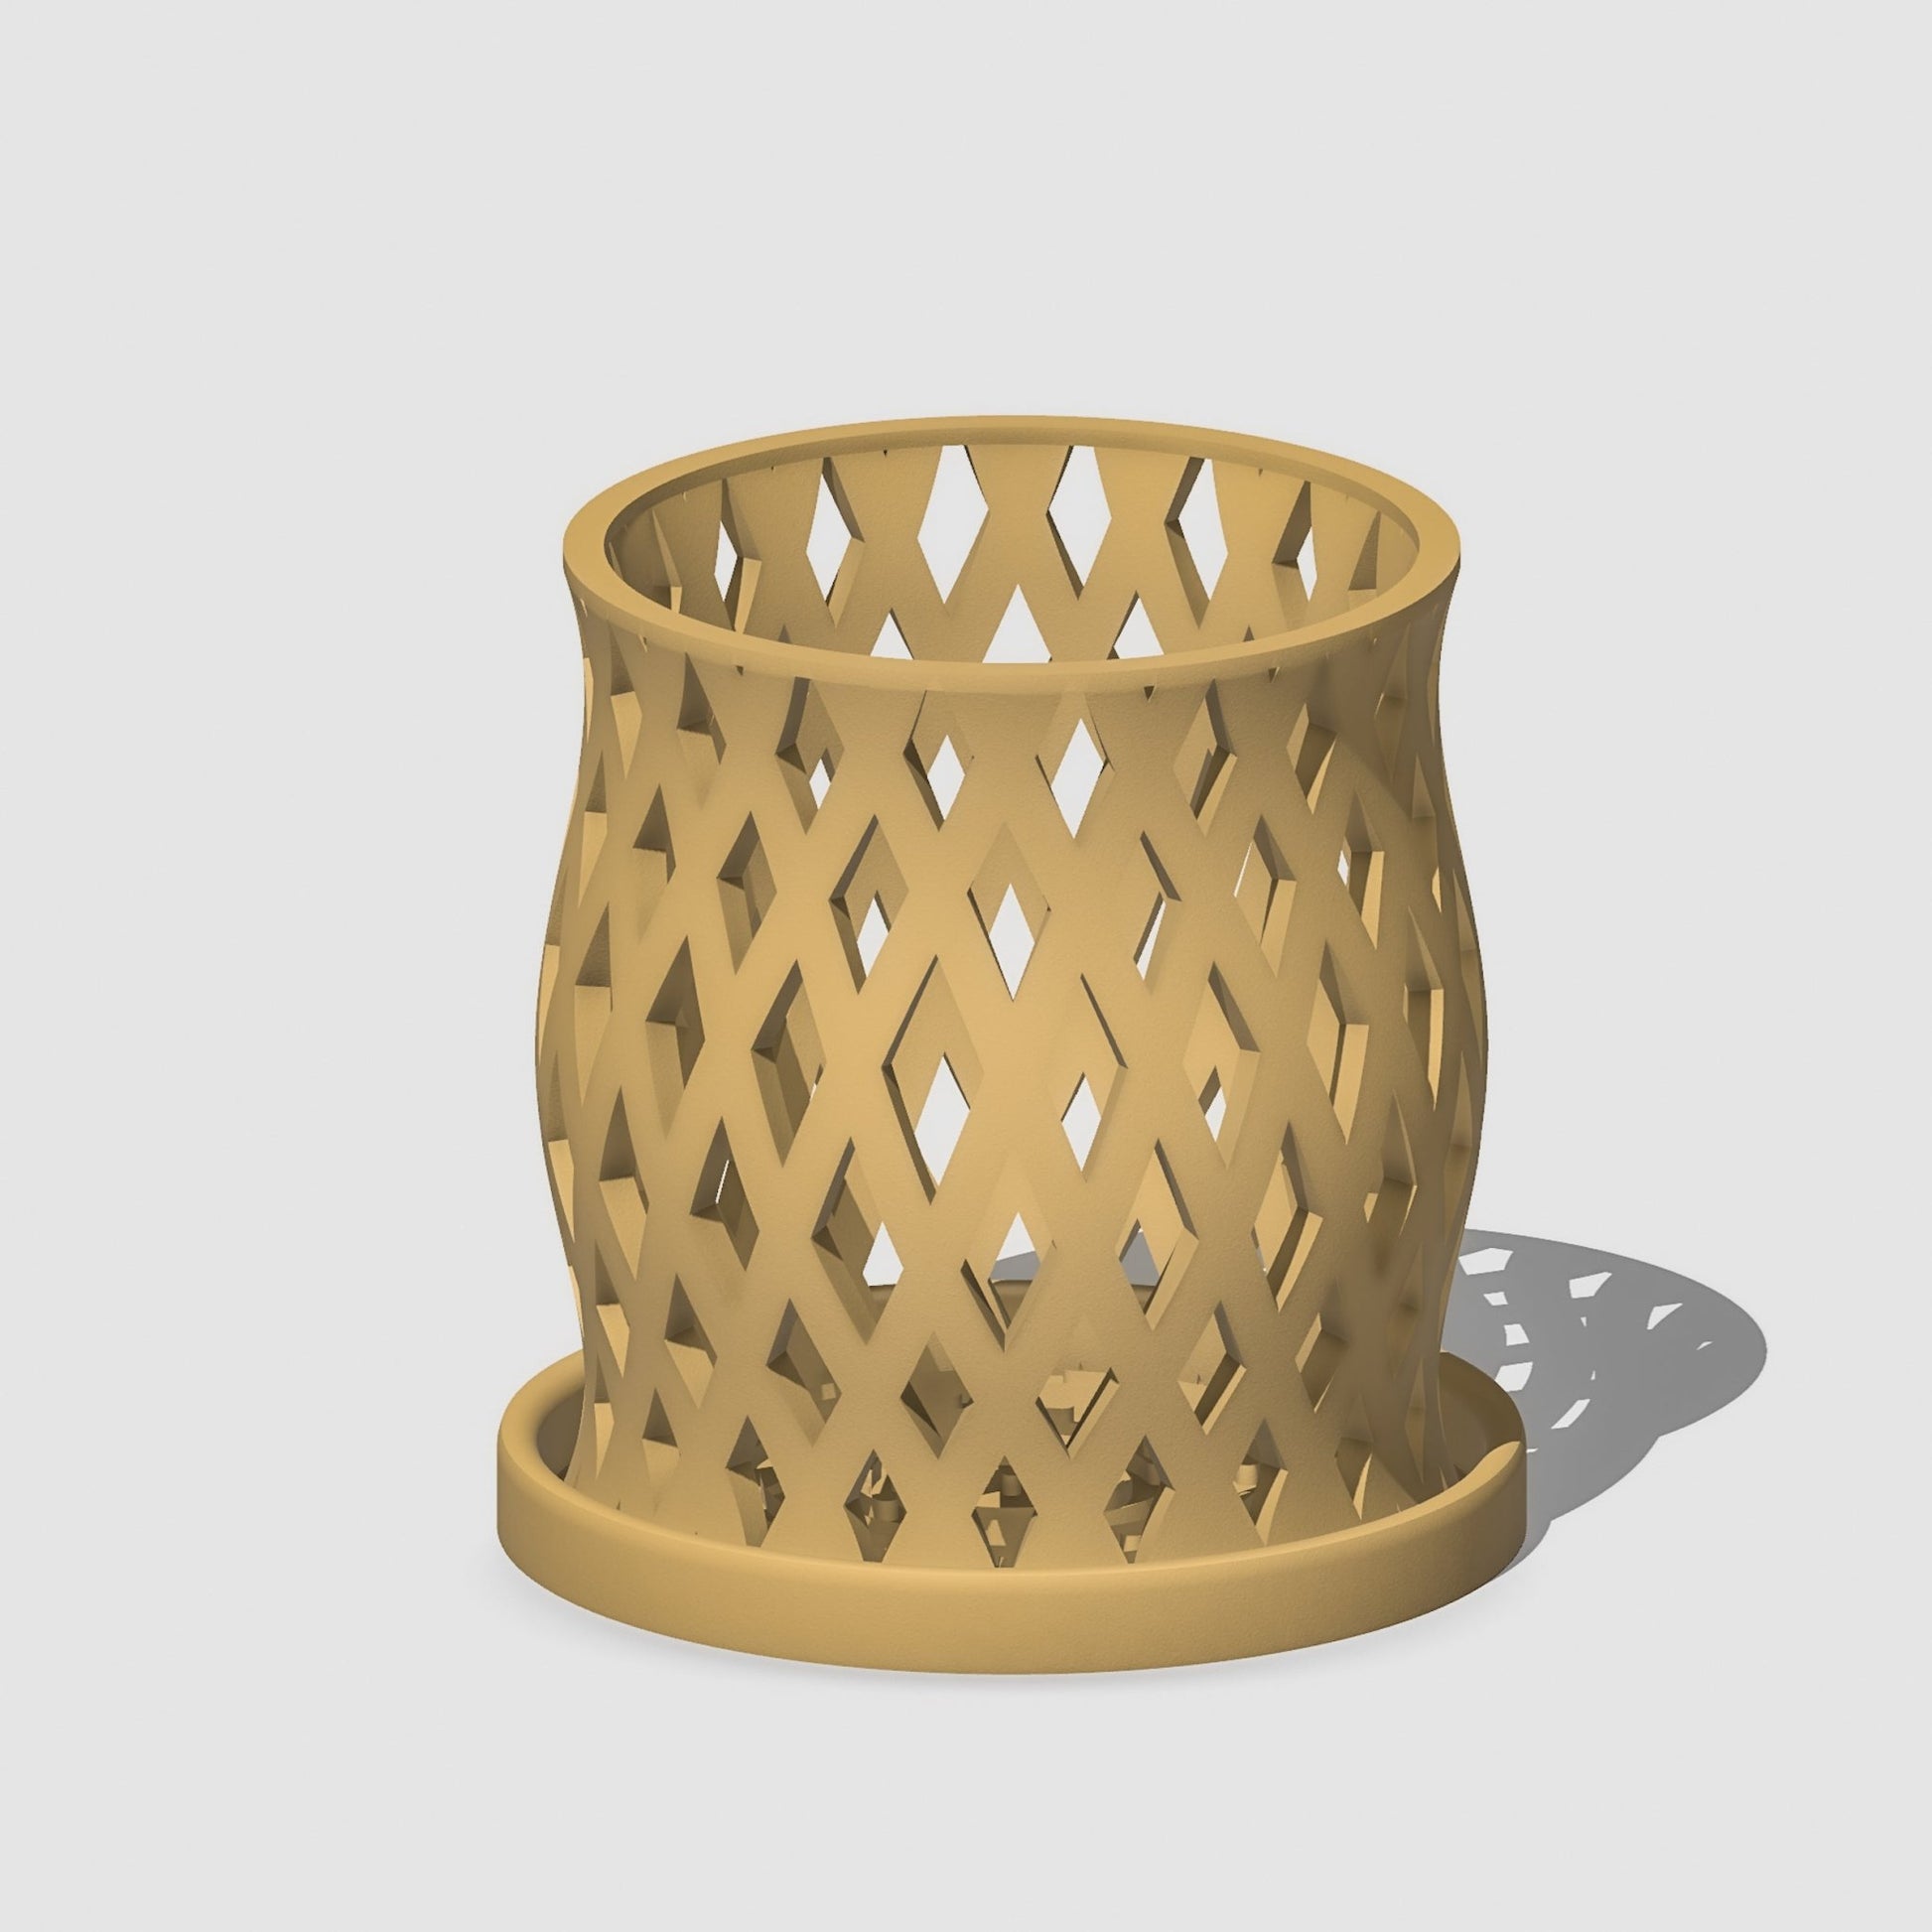 Unique Orchid Pot, Plant Pot with Drainage and Saucer, 3D Printed Planter, Use Leca & Aroid Mixes, Matte Beige, Lightweight, Philodendron "CAPRICIOUS" - Rosebud HomeGoods Beige 4 inch Without Drip Tray MODERN HOME GOOD